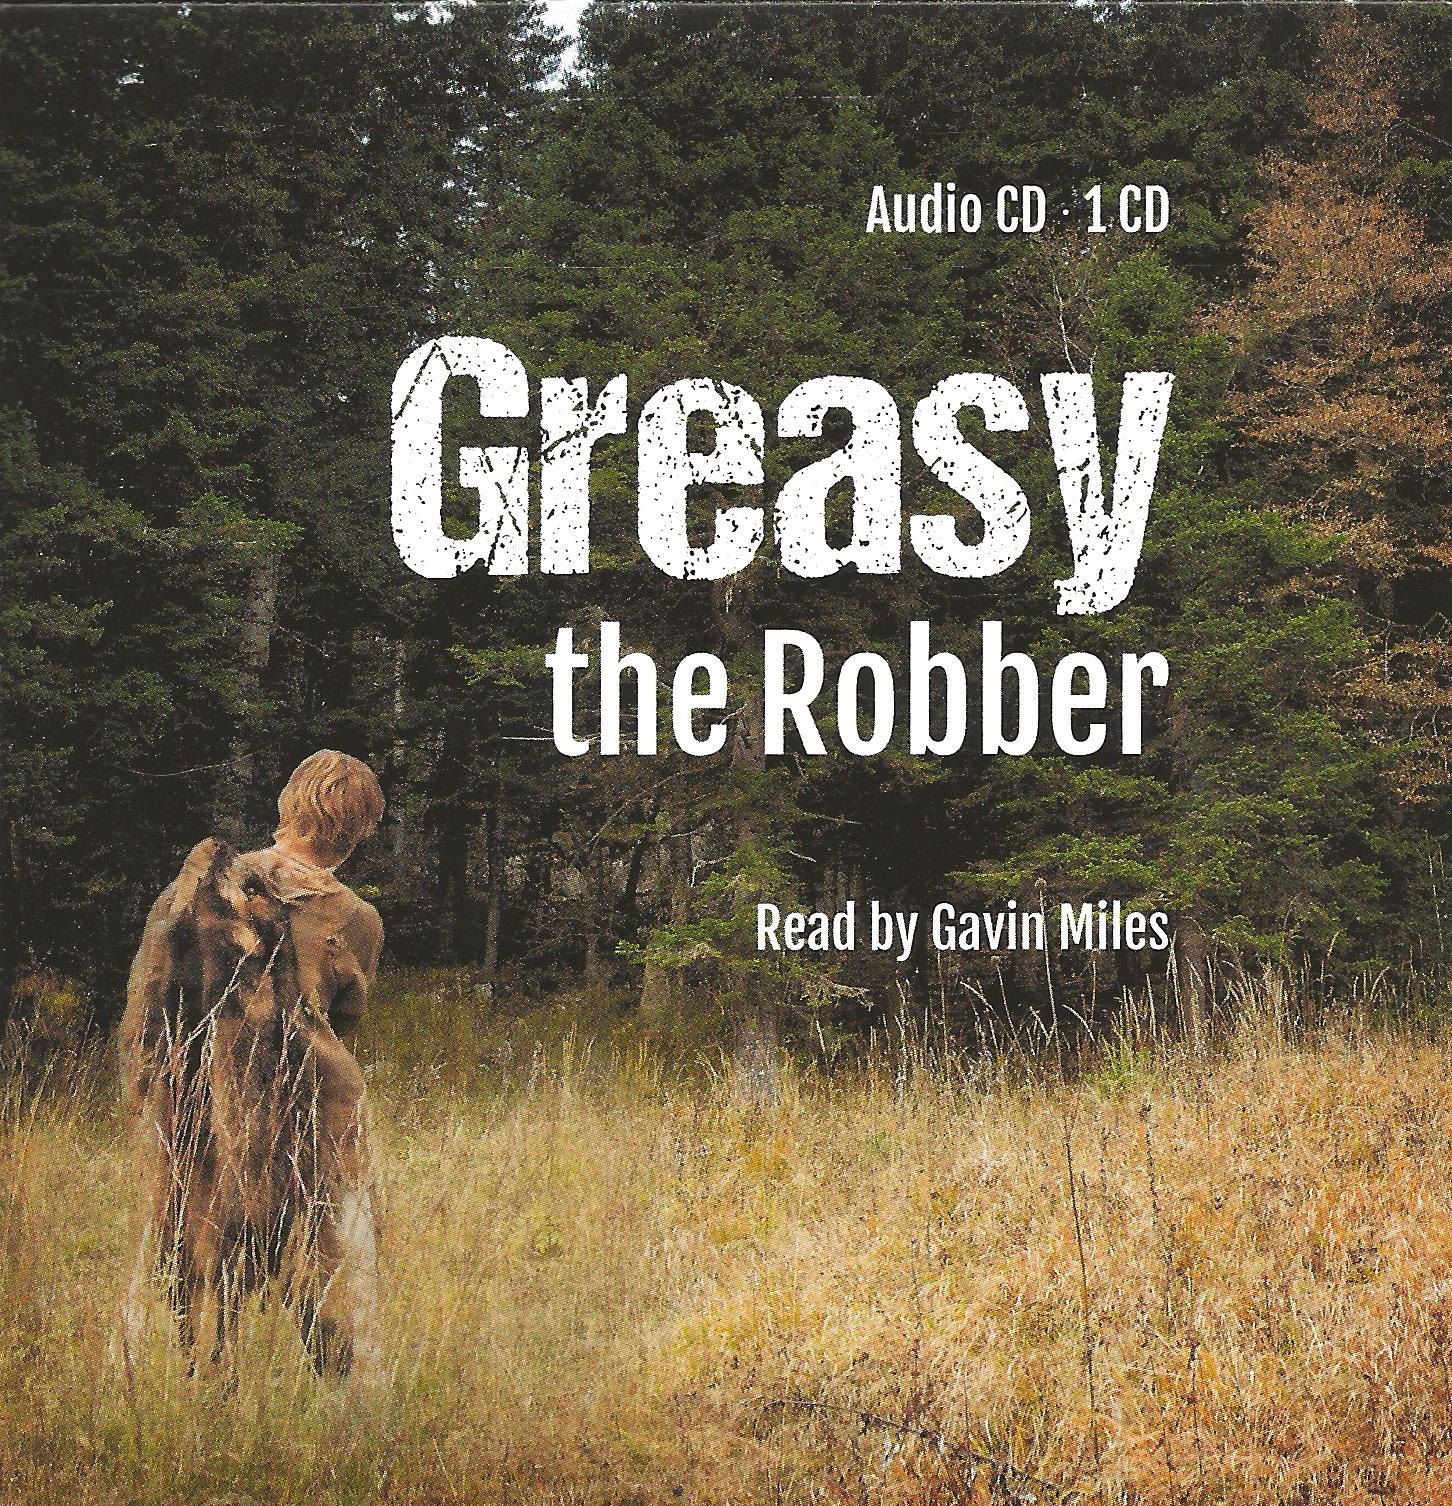 GREASY THE ROBBER Read by Gavin Miles